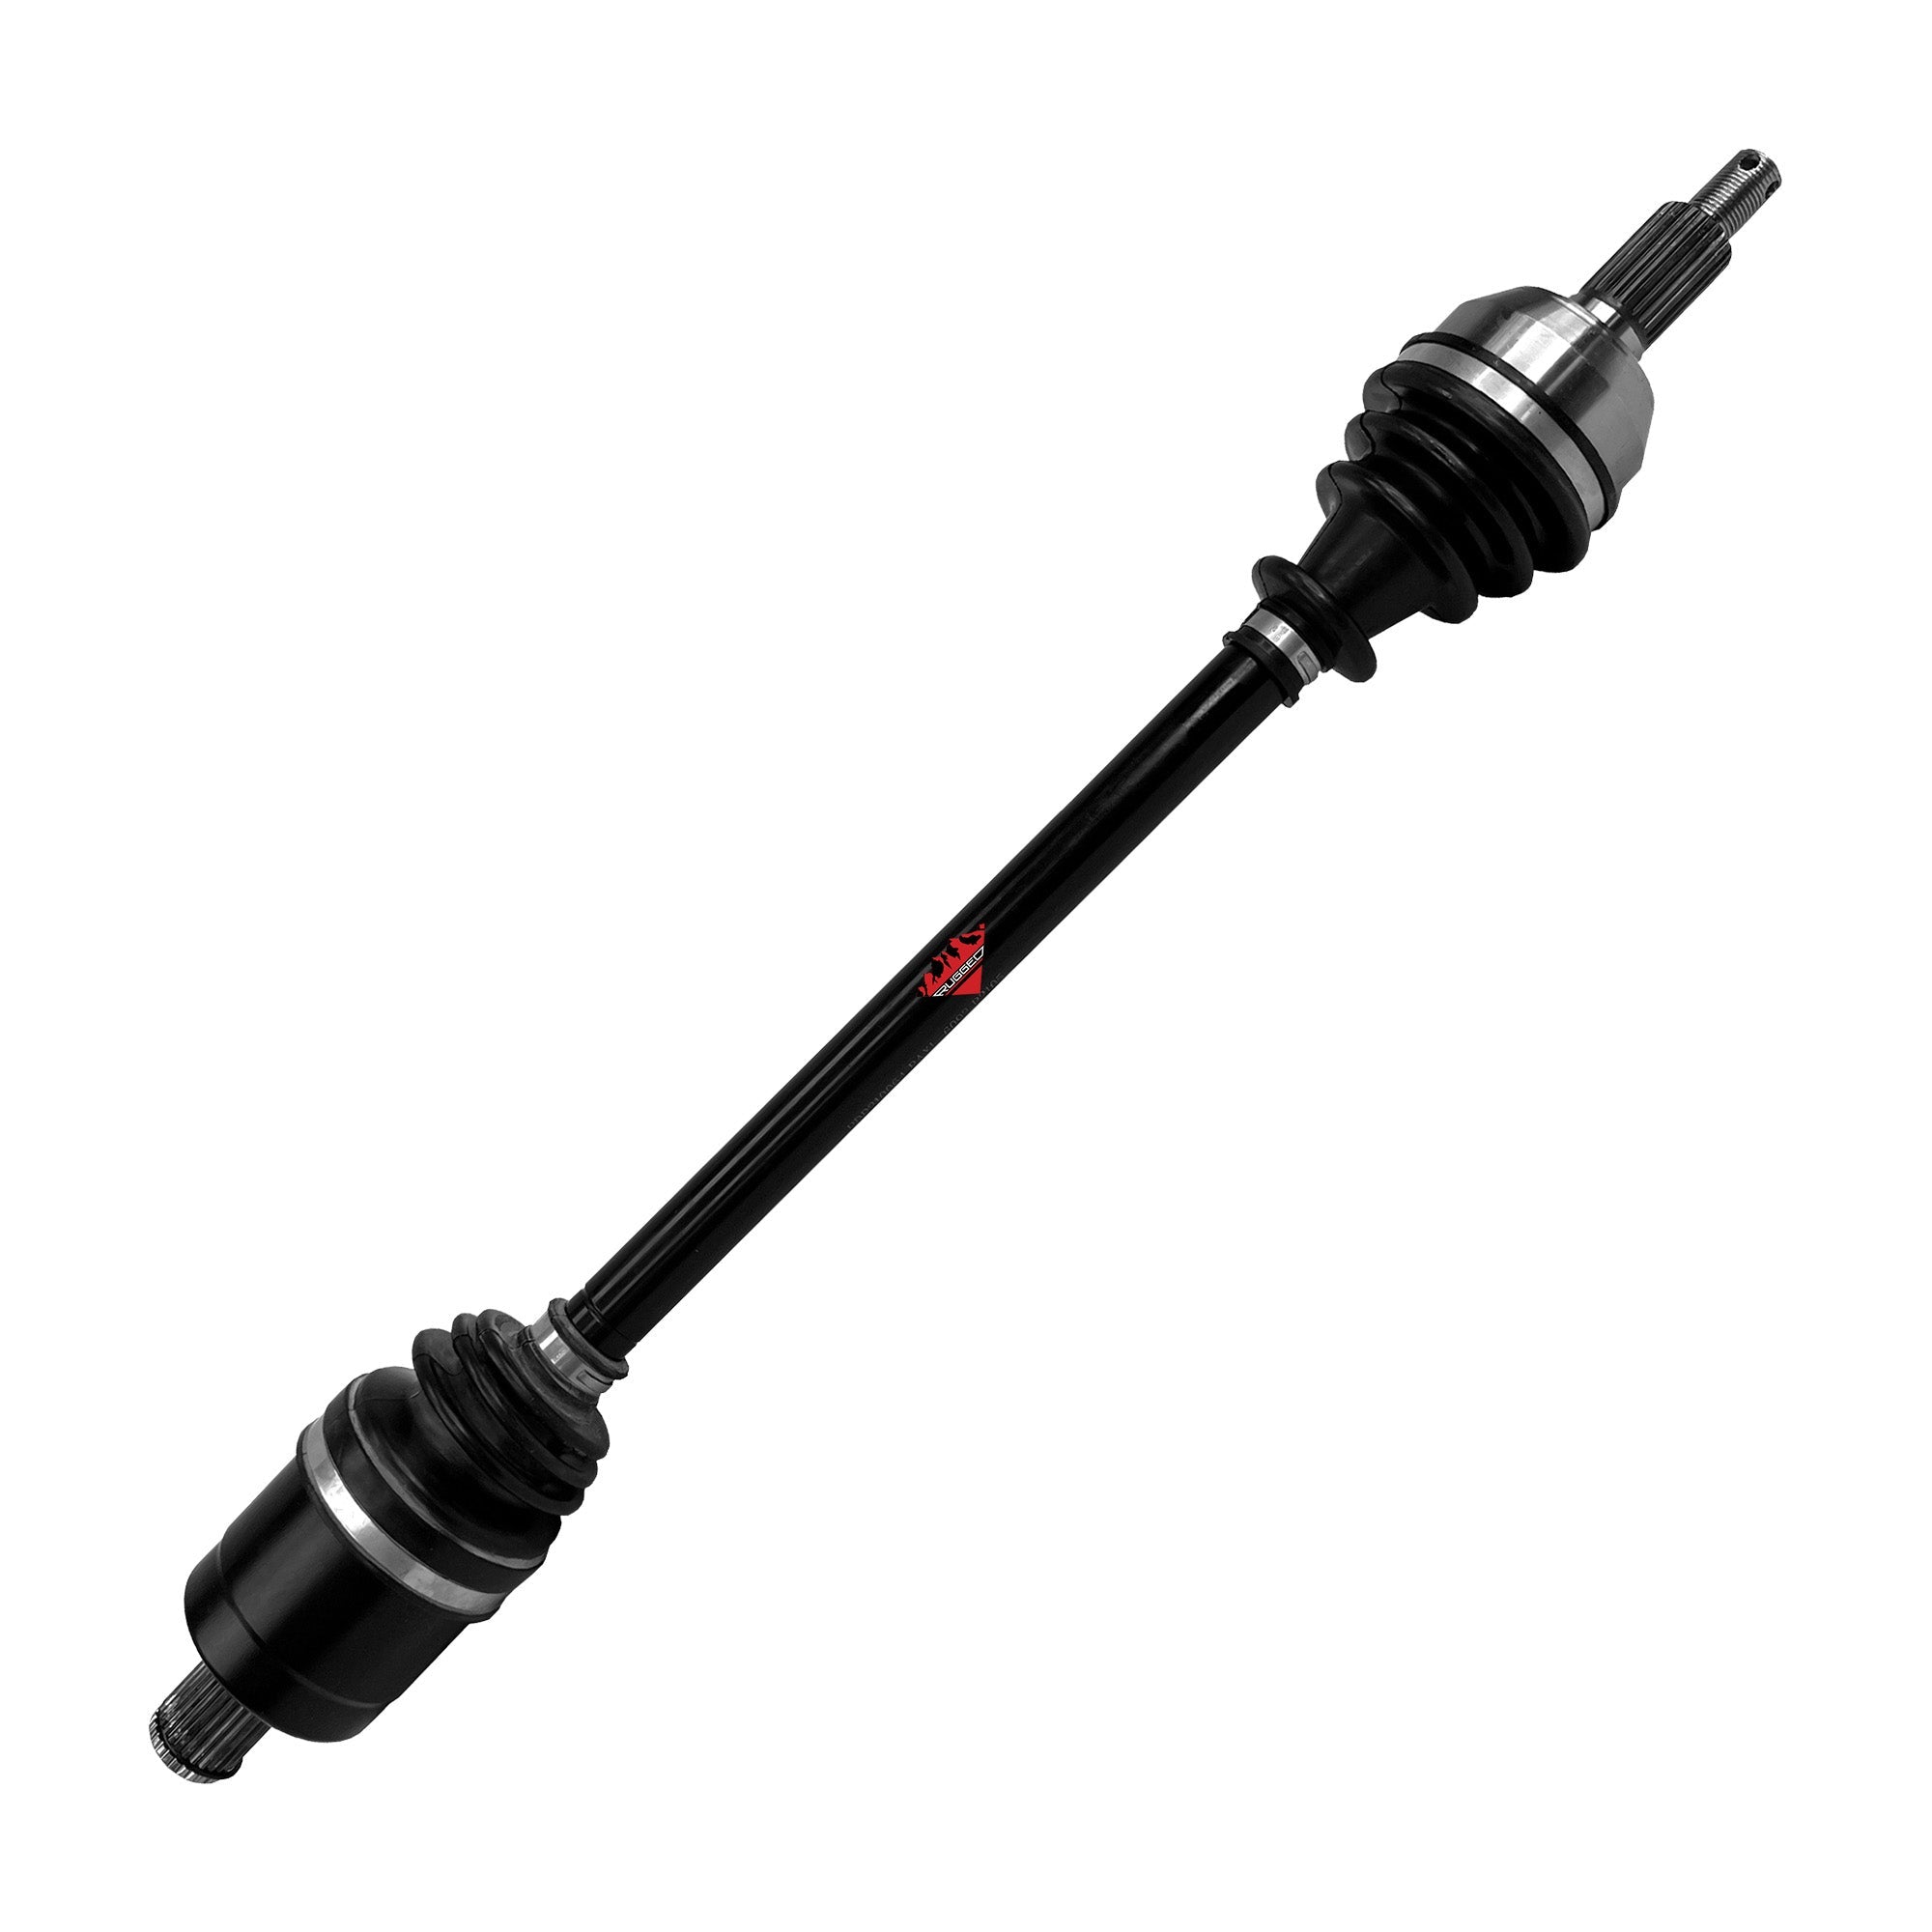 Performance Axle for Coleman Outfitter 1000 Crew 